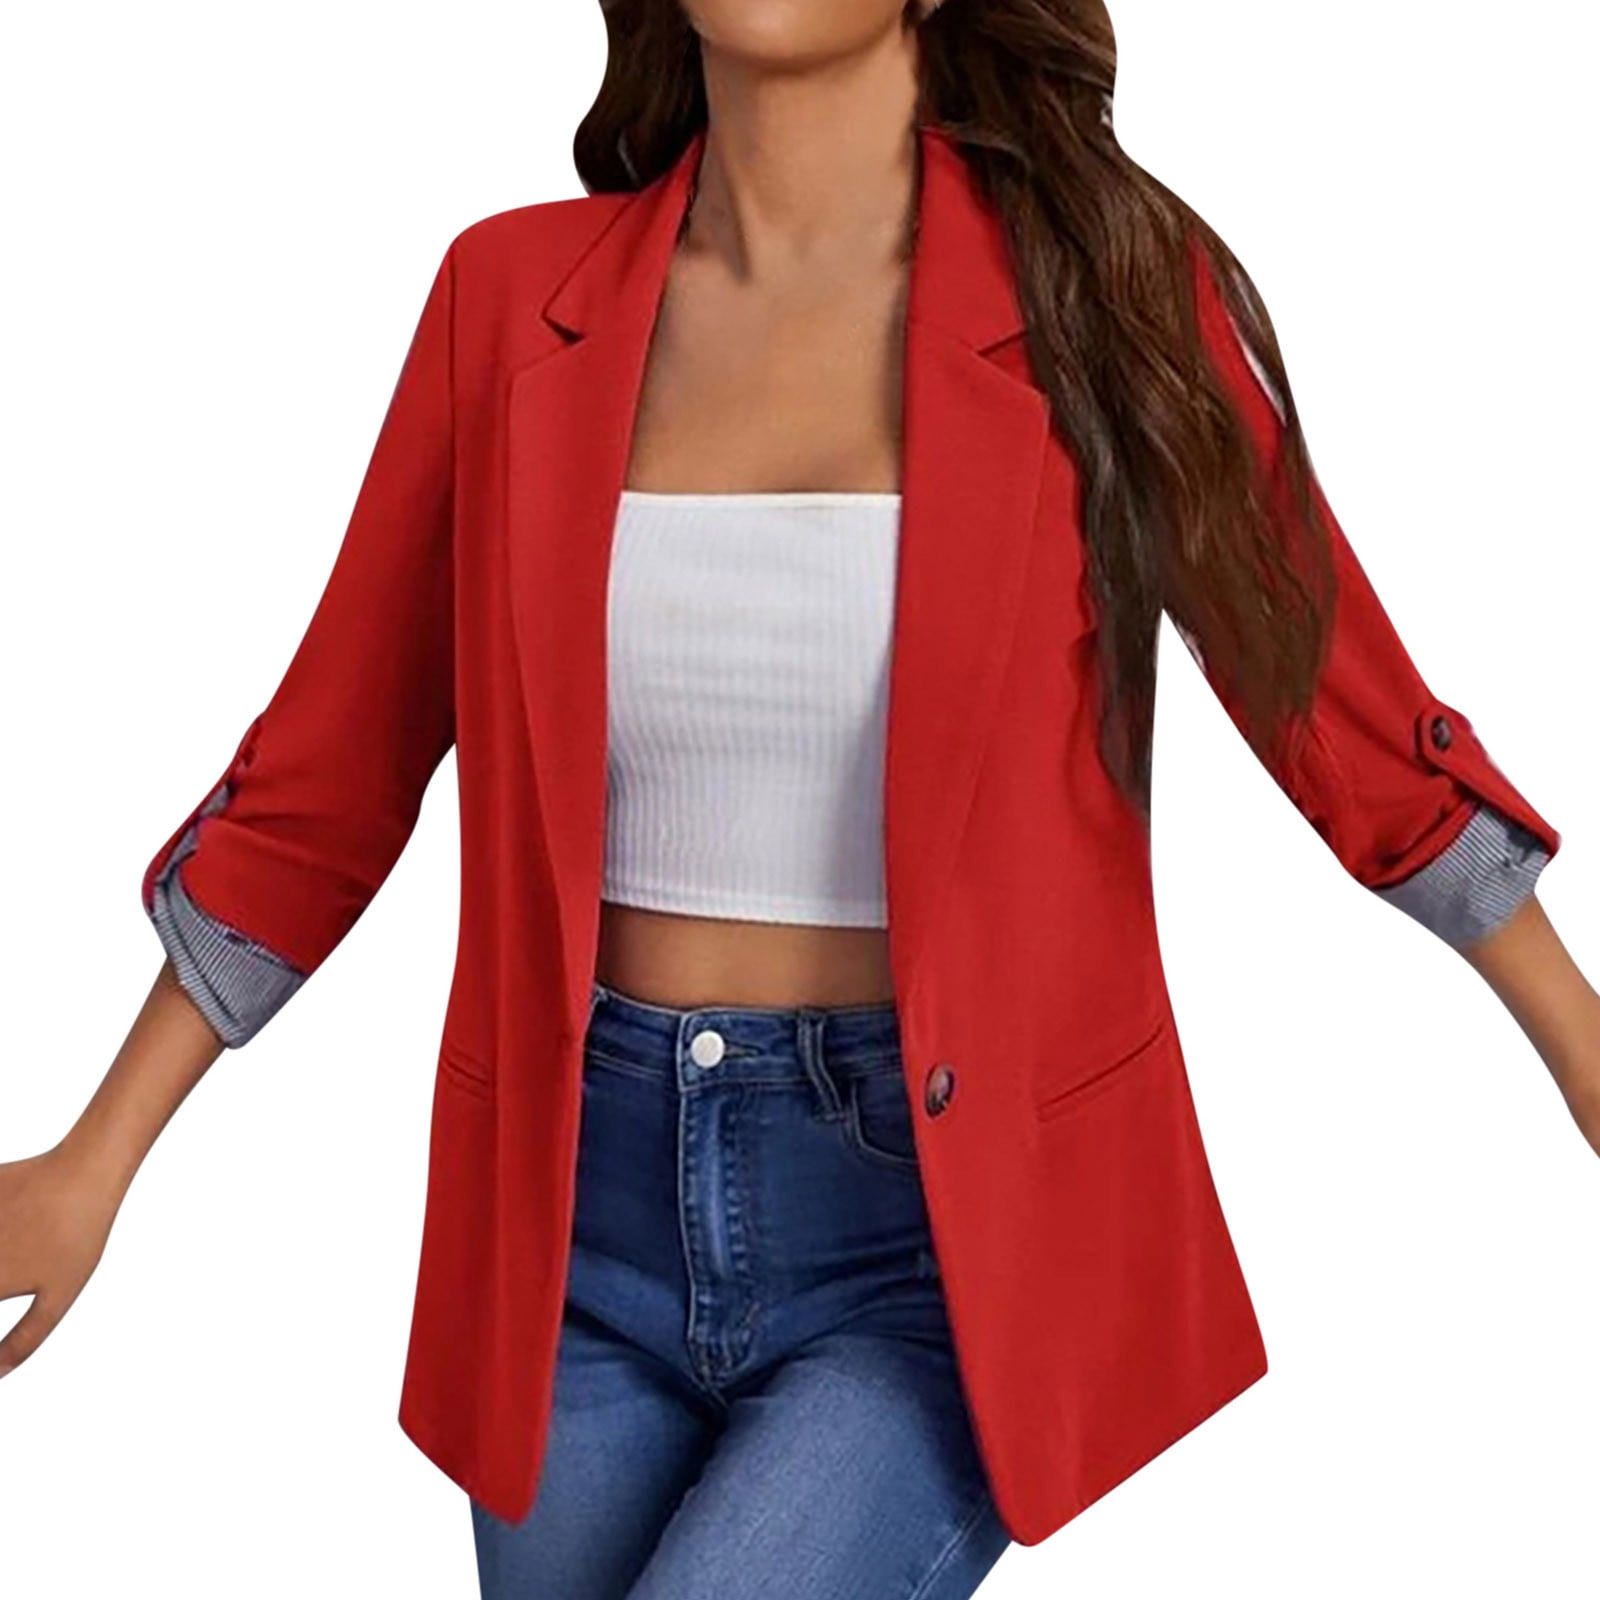 Reduced Price Womens Clothing ! BVnarty Women's Top Business Attire  Cardigan Coat Winter Fashion Top Solid Color Lapel Long Sleeve Lightweight  Plus Size Shacket Jacket Casual for Mujer Red XXL 